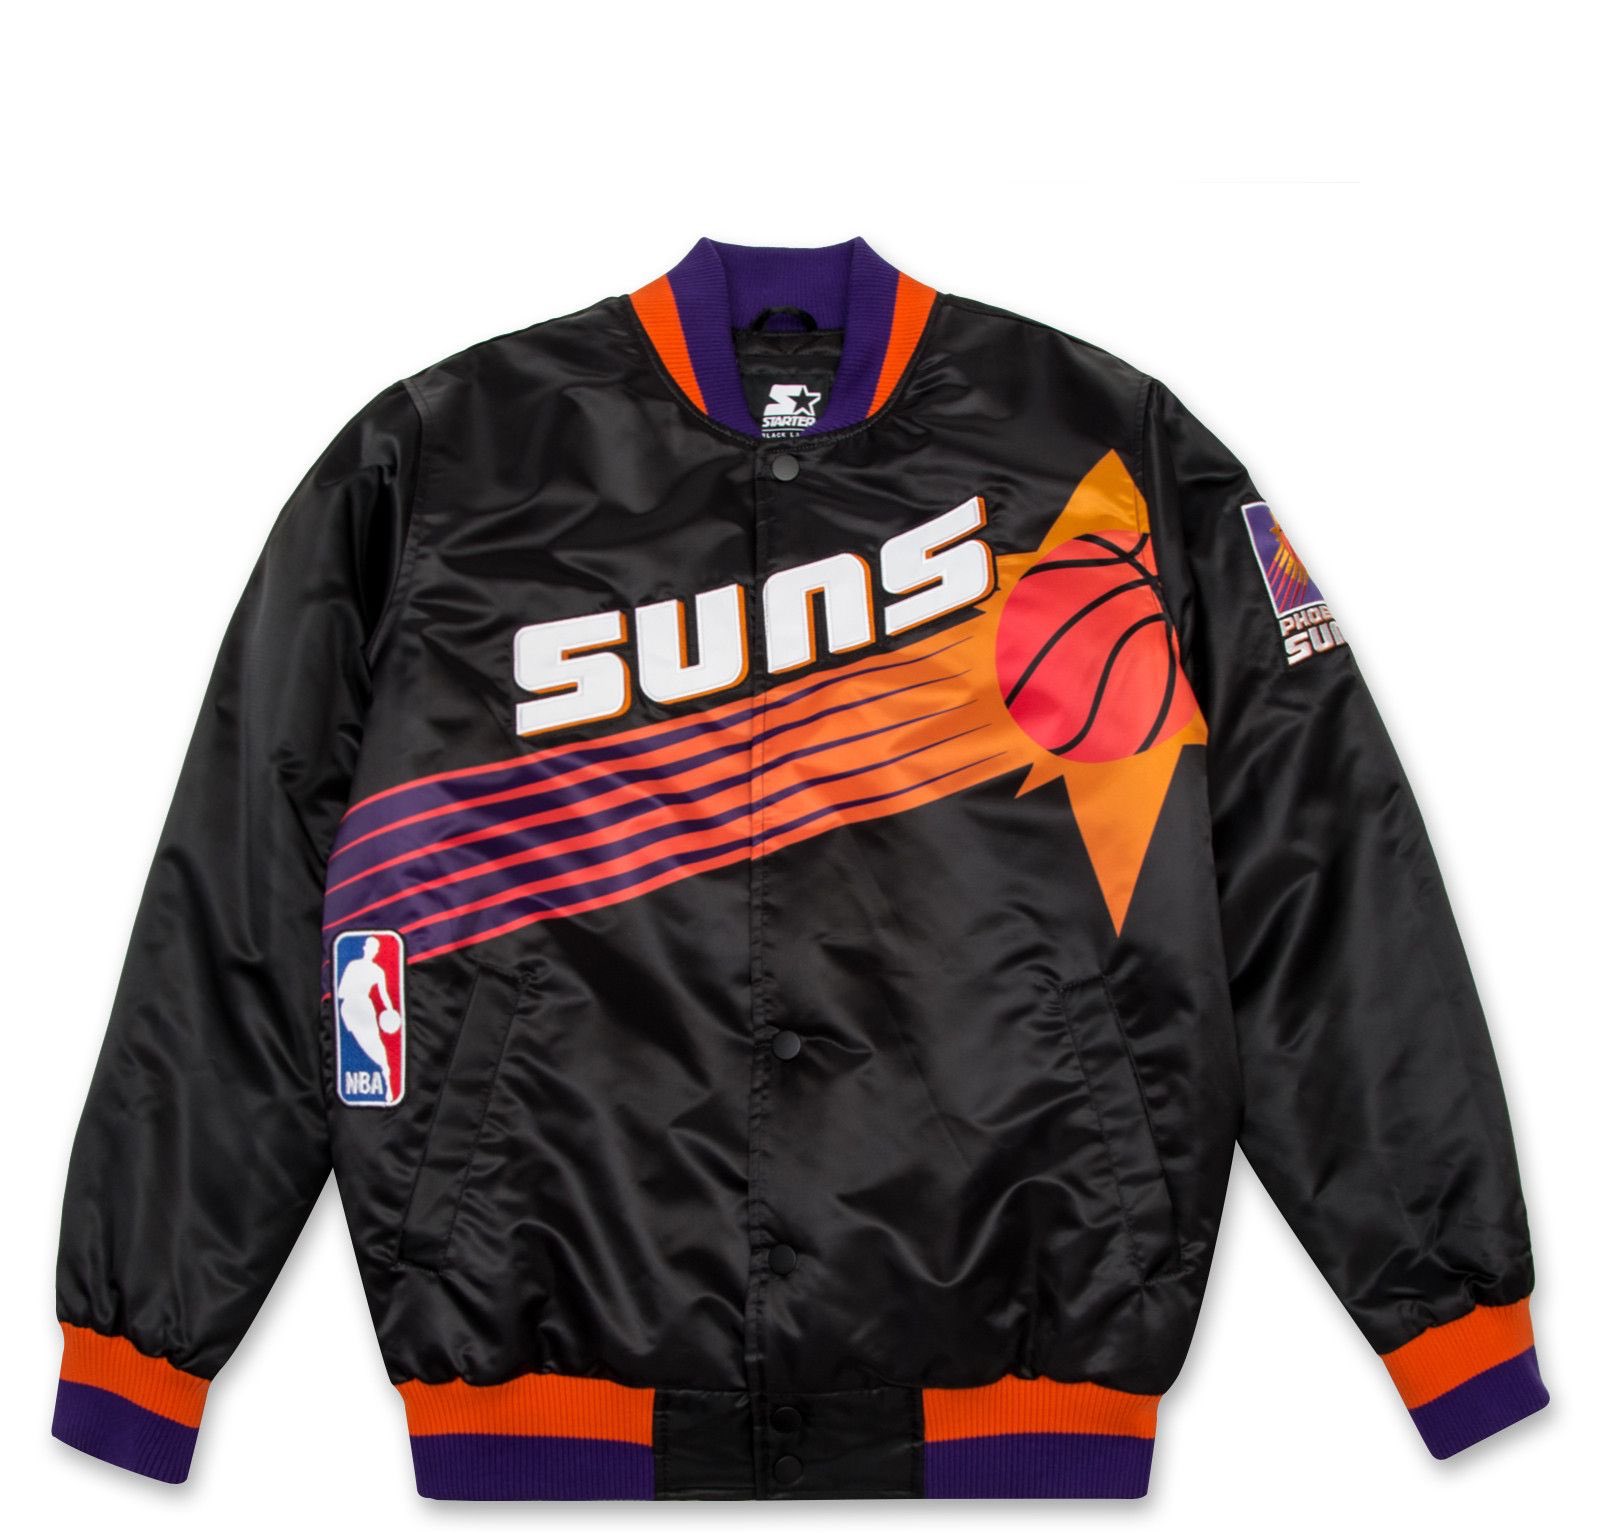 Heathered Pearls on X: Top 10 80s-90s Starter Jackets #10 https